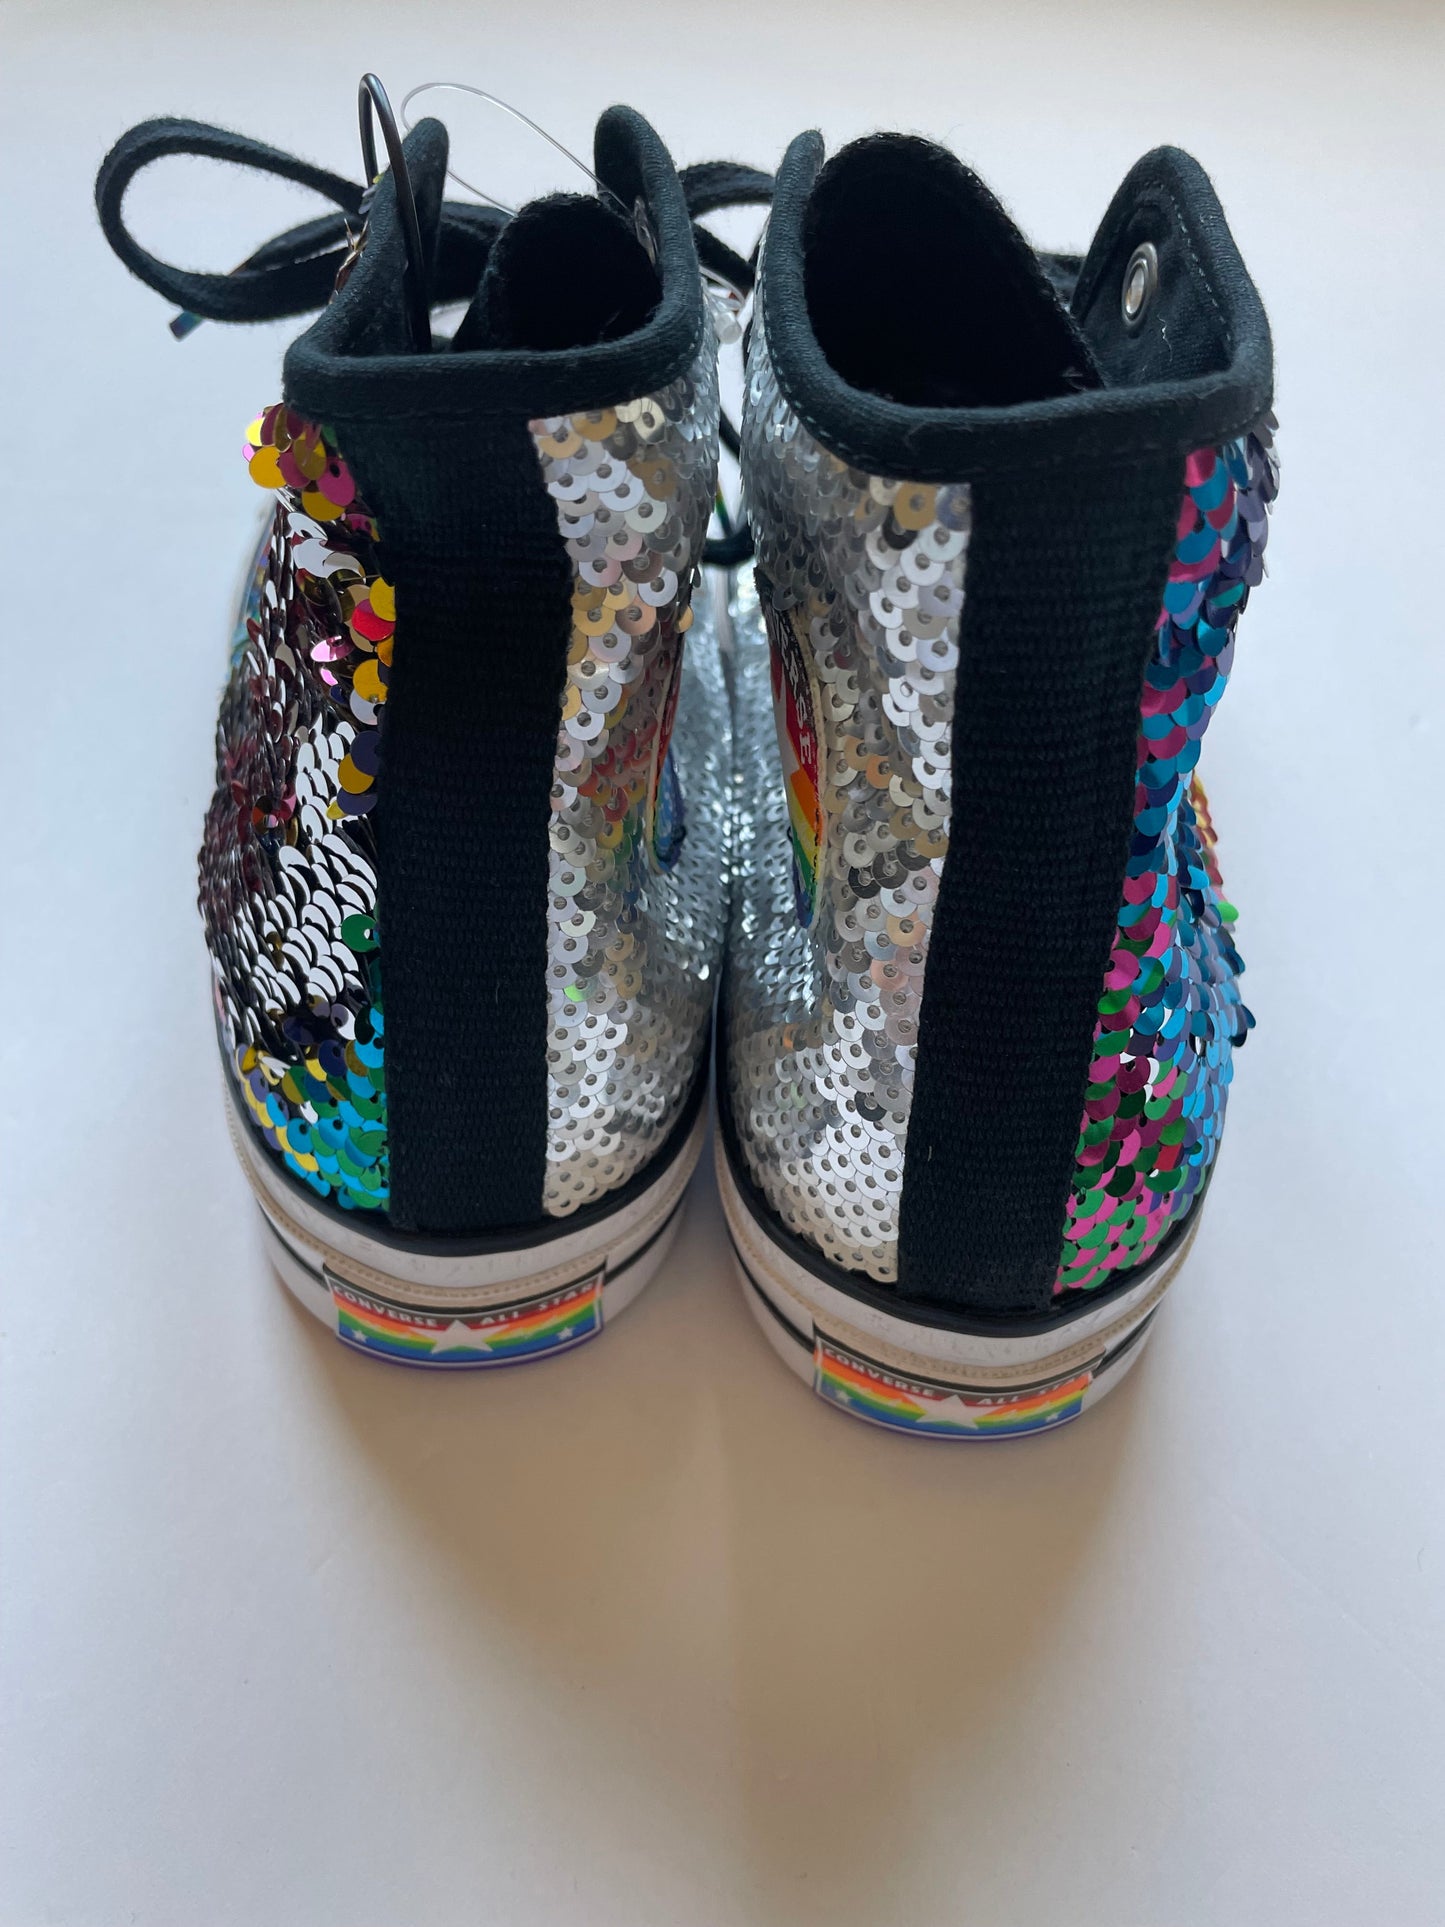 Multi-colored Shoes Sneakers Converse, Size 9